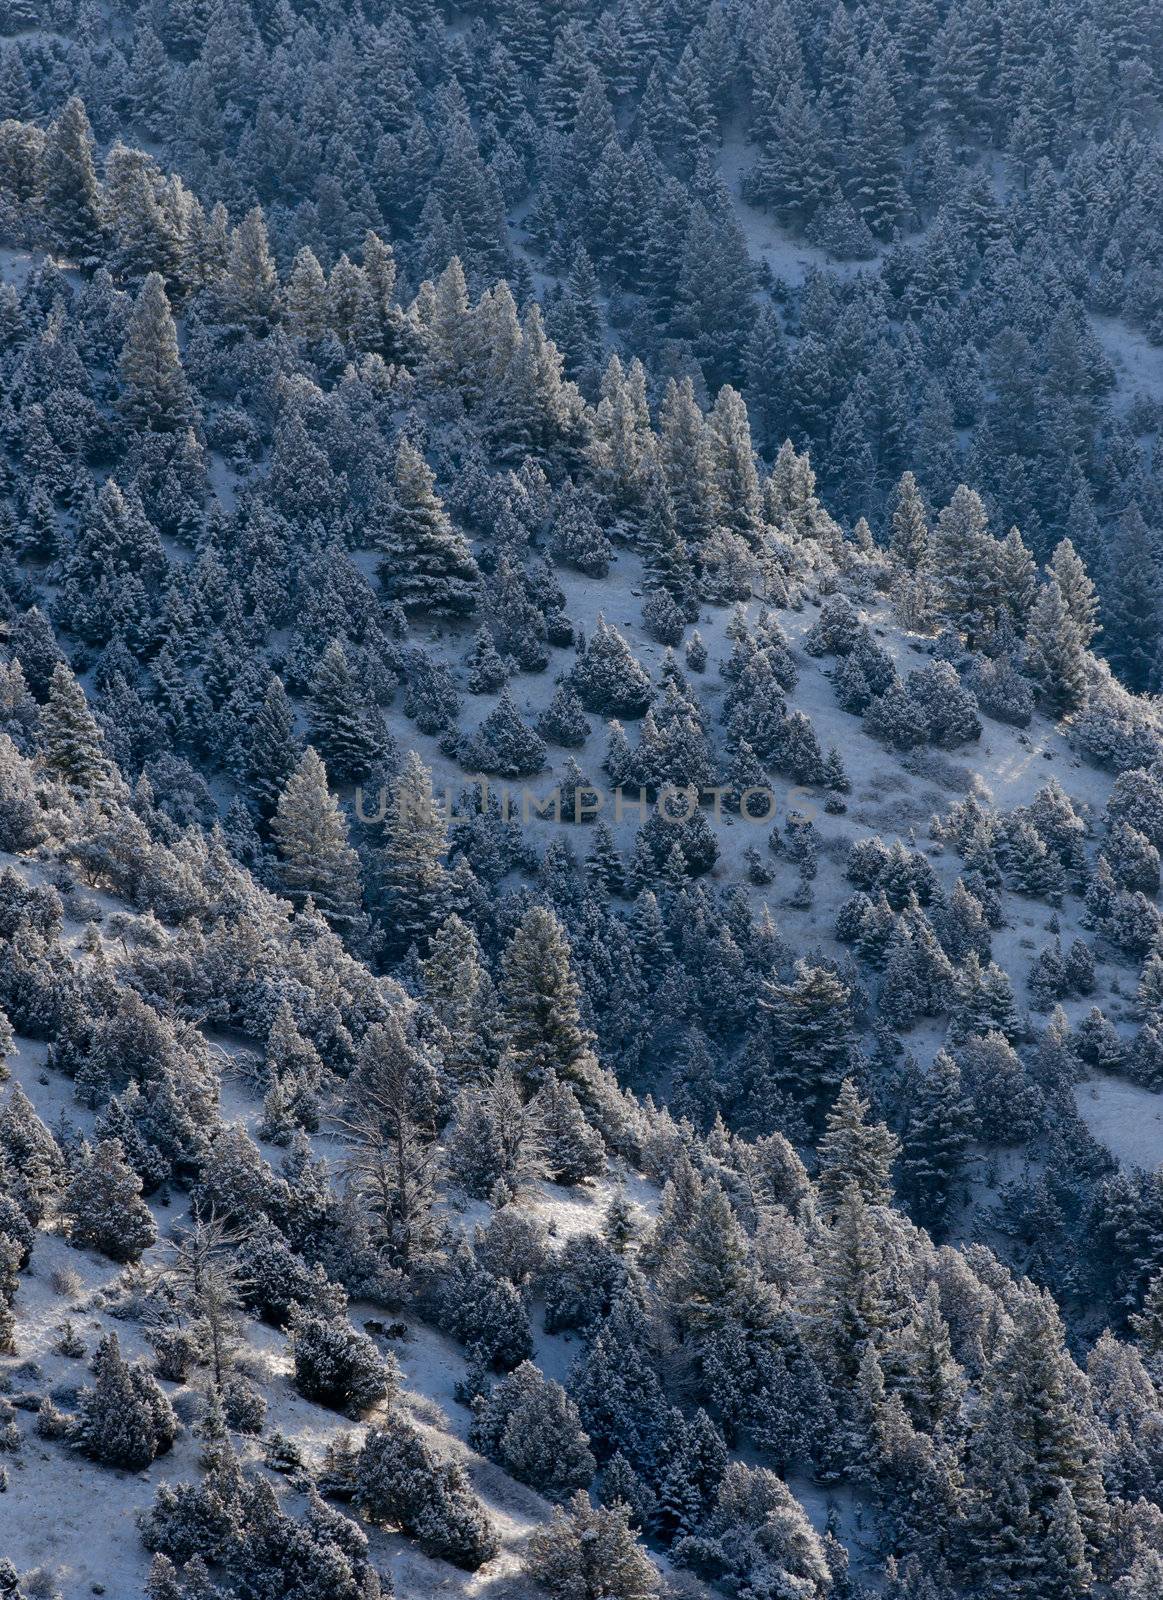 Coniferous forest in winter, Madison County, Montana, USA by CharlesBolin